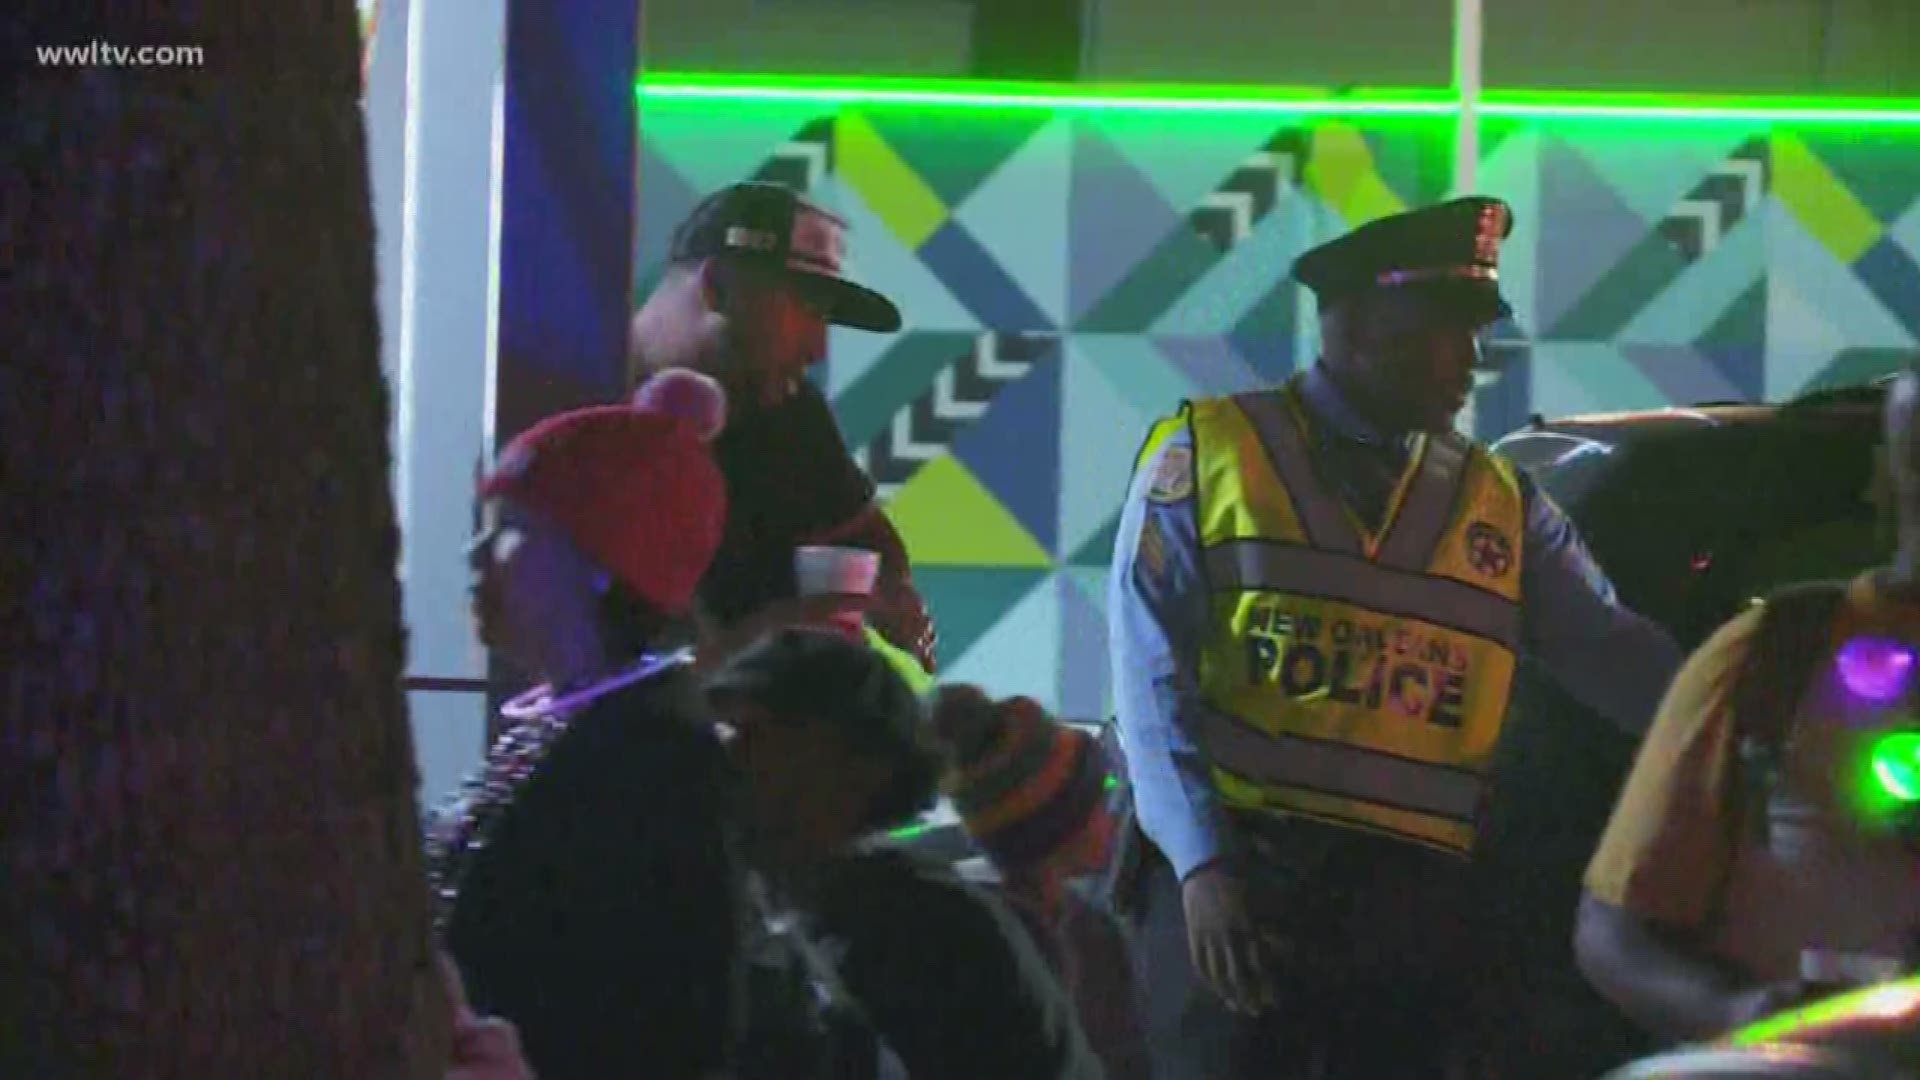 A fatal accident between a two-section float and a spectator at the Krewe of Nyx parade marred the first big night of parades on the final weekend of parading.